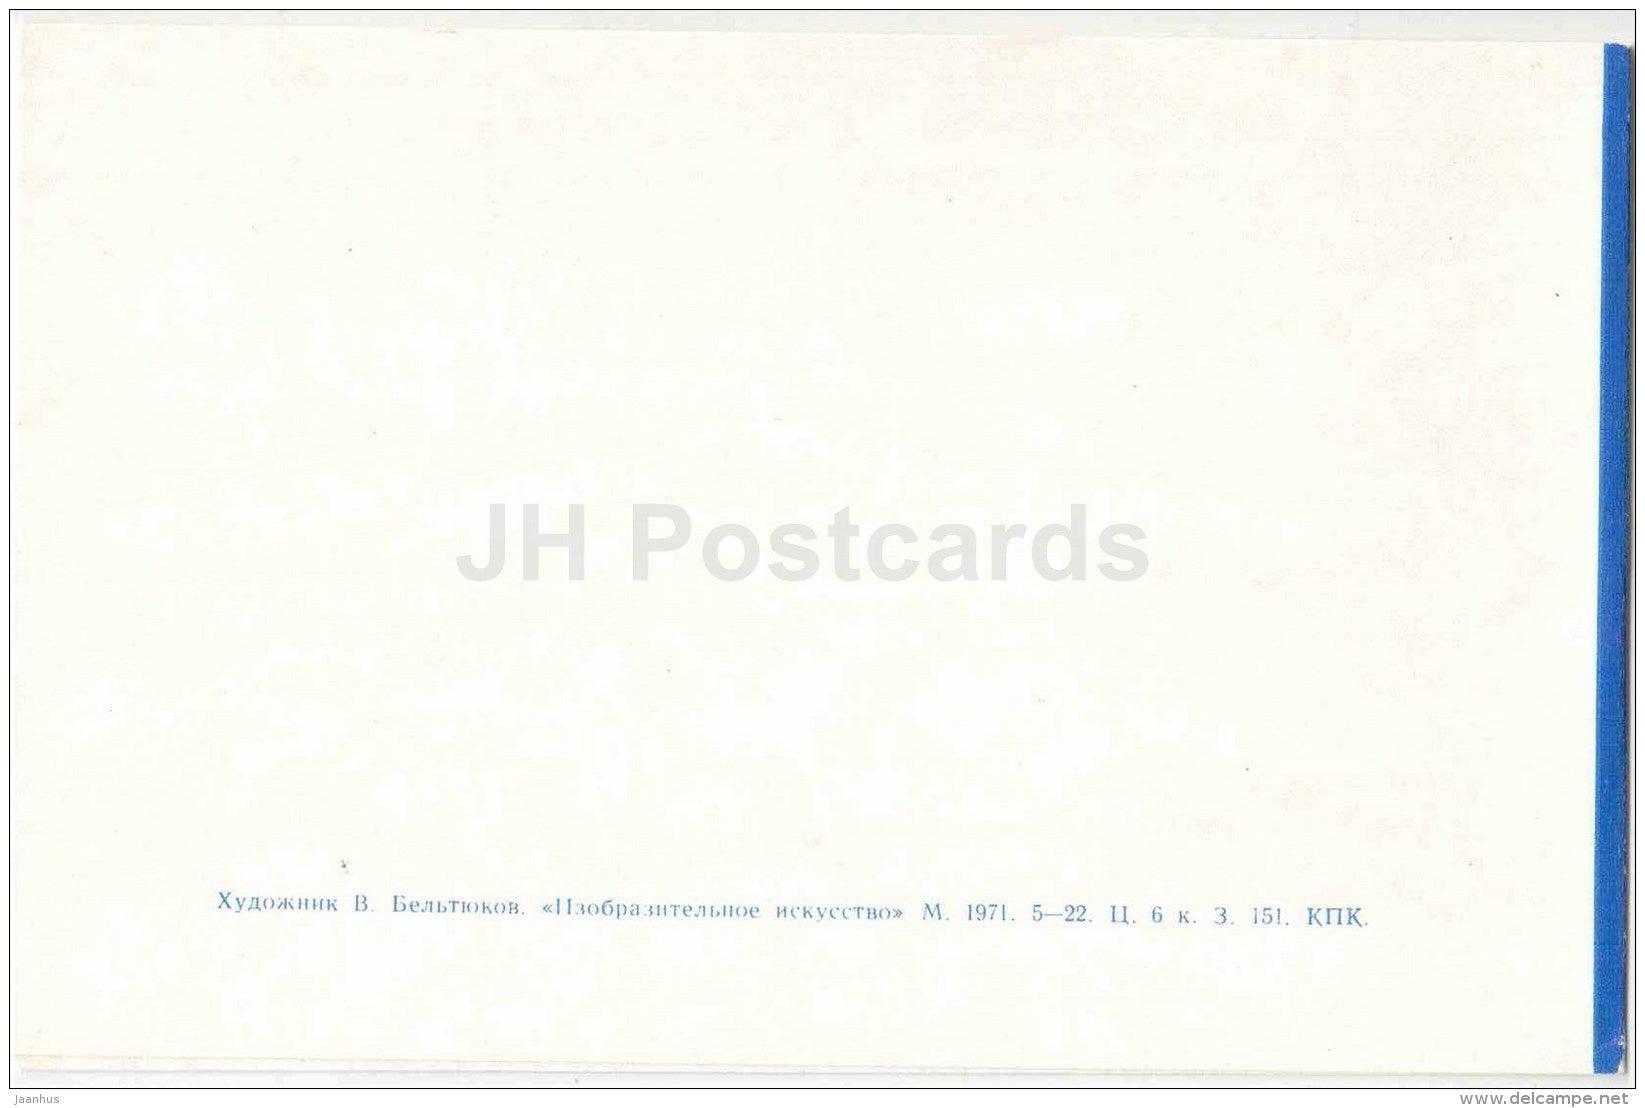 New Year greeting card by V. Beltyukov - Fir tree - Red Star - 1971 - Russia USSR - unused - JH Postcards